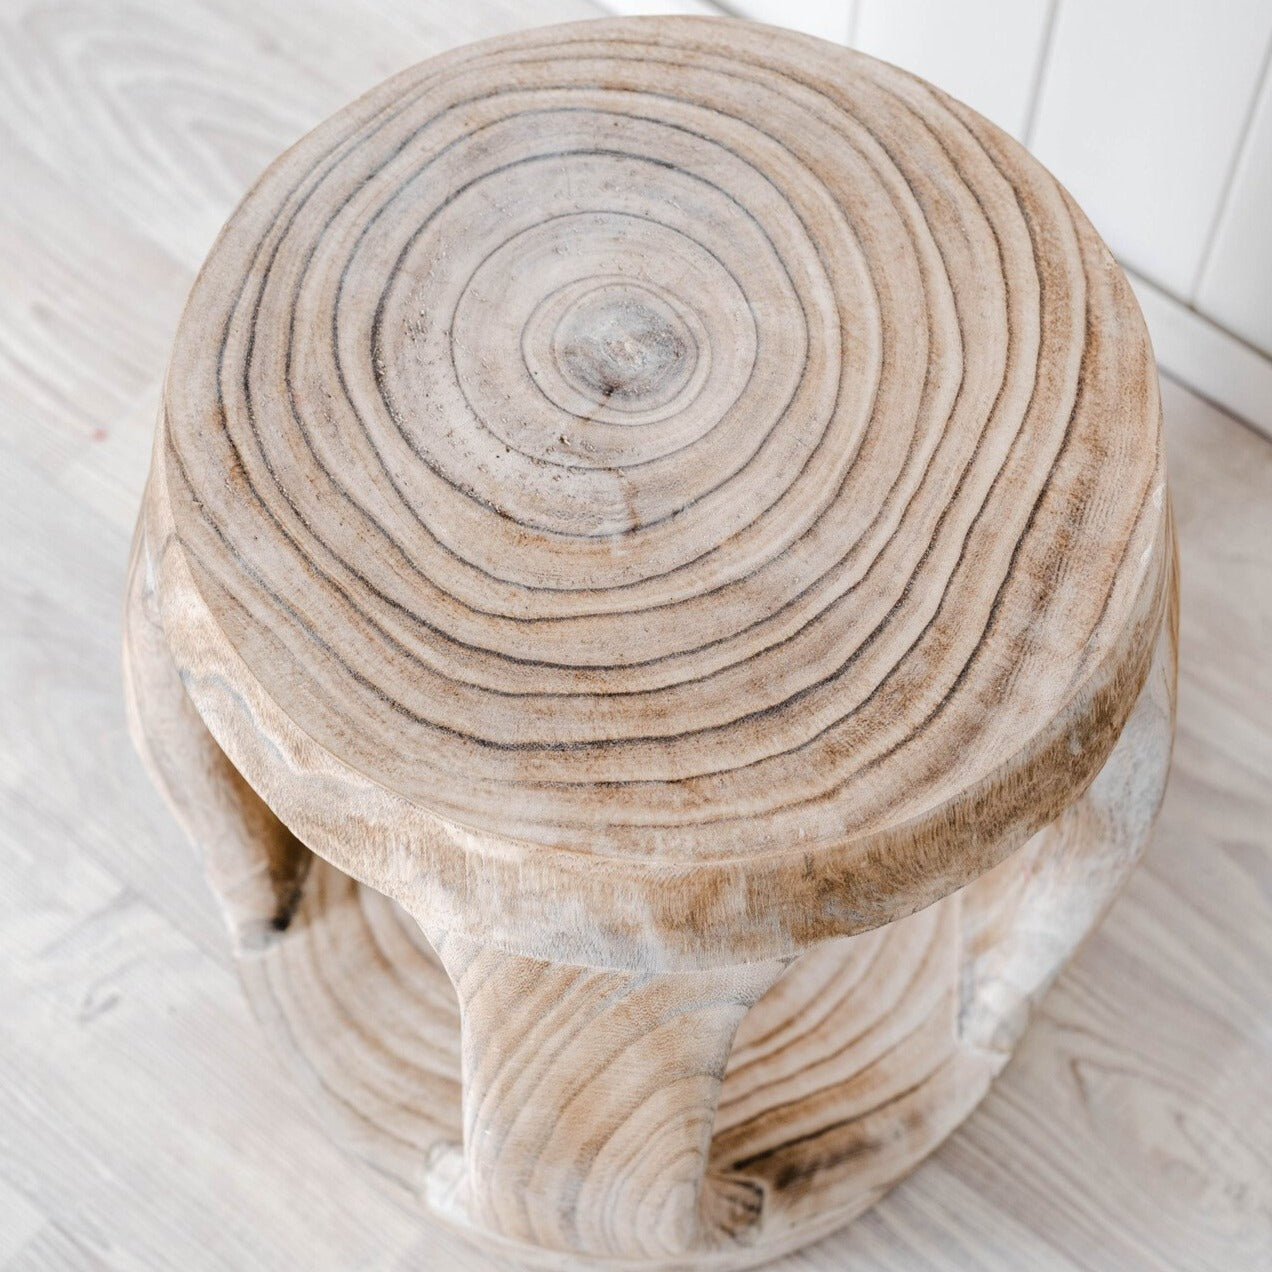 White wash wooden stool / side table